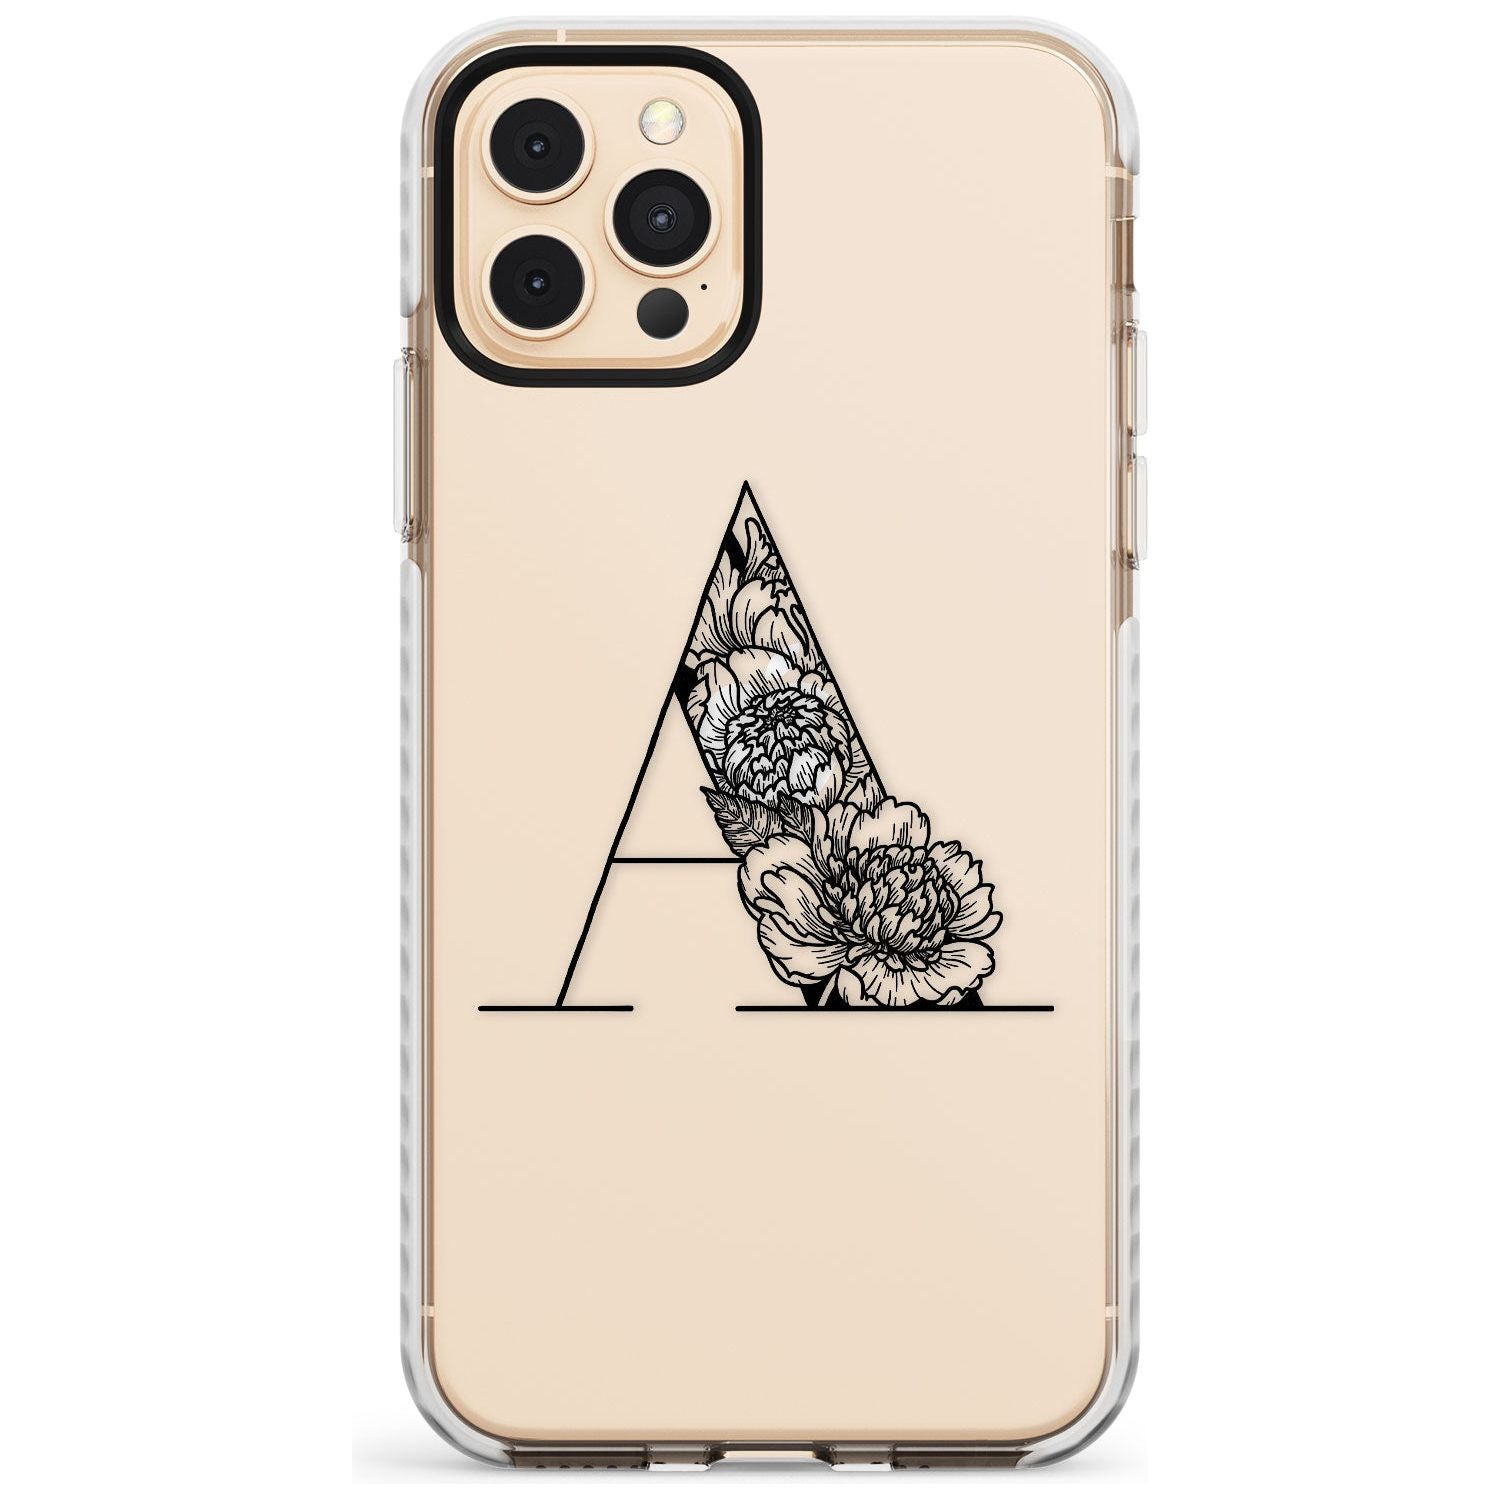 Floral Monogram Letter Slim TPU Phone Case for iPhone 11 Pro Max